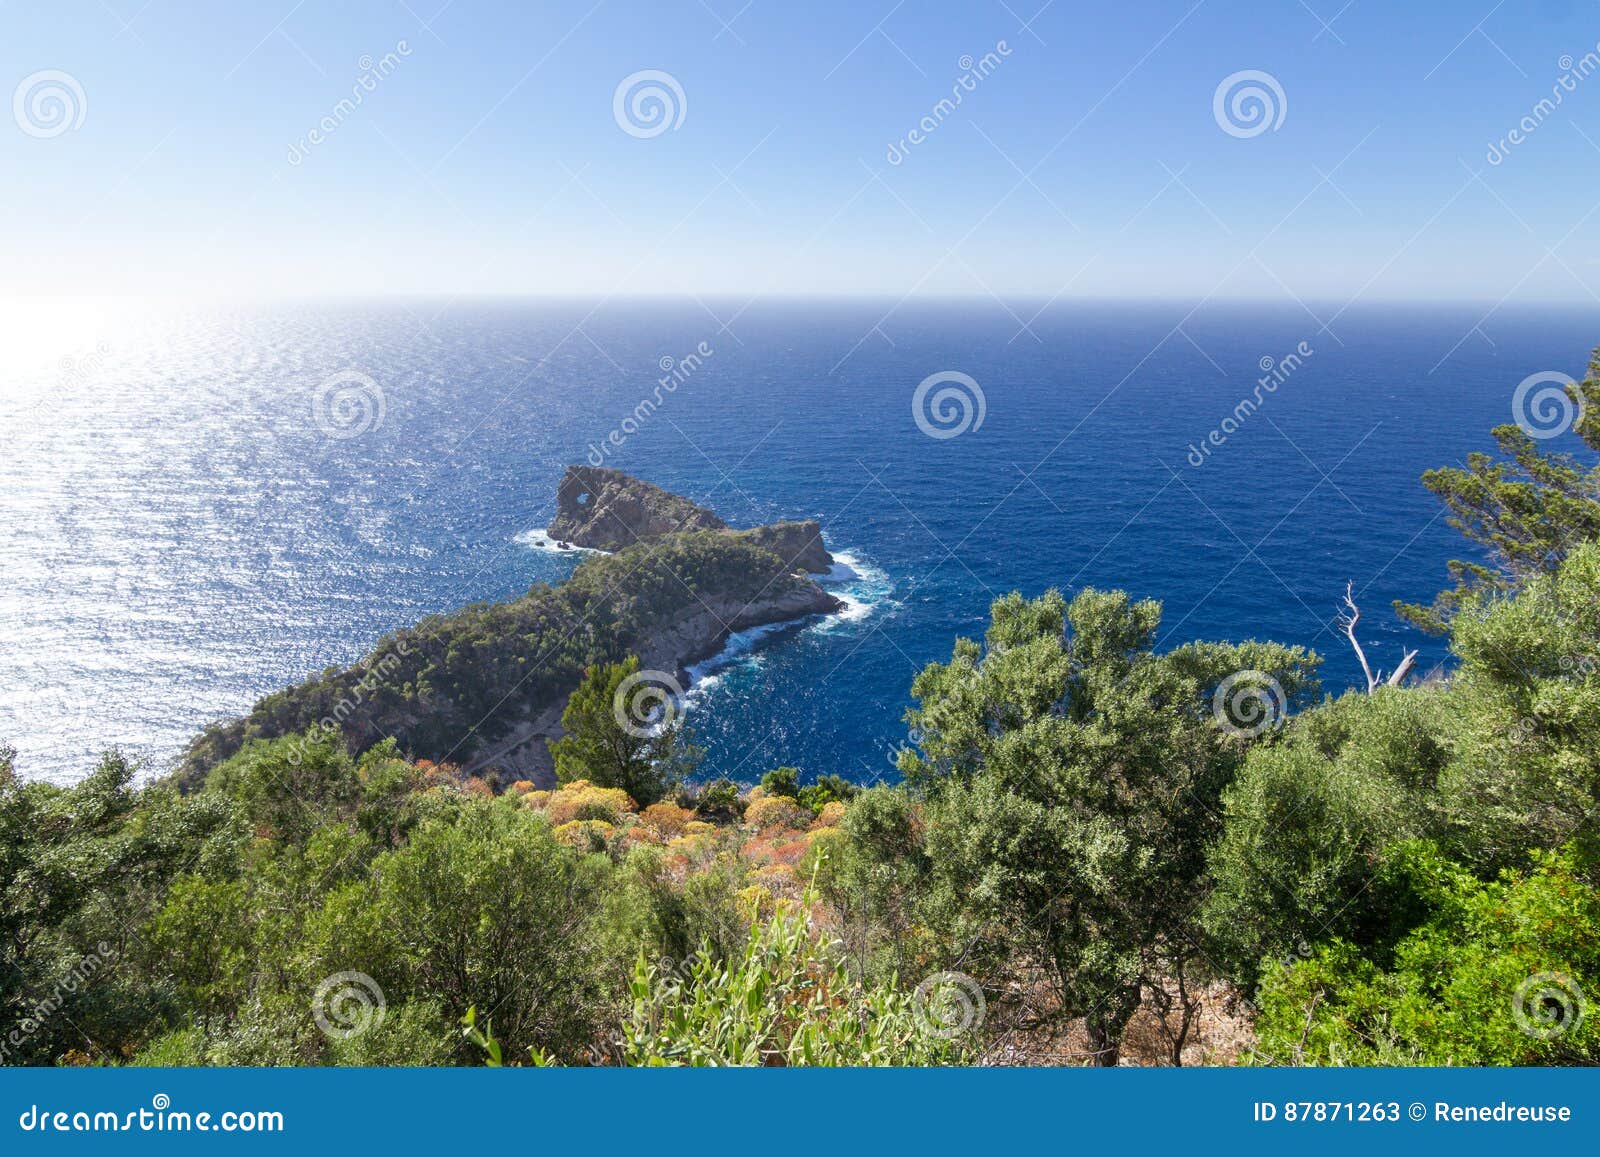 famous viewpoint of son marroig over the blue mediterranean sea.